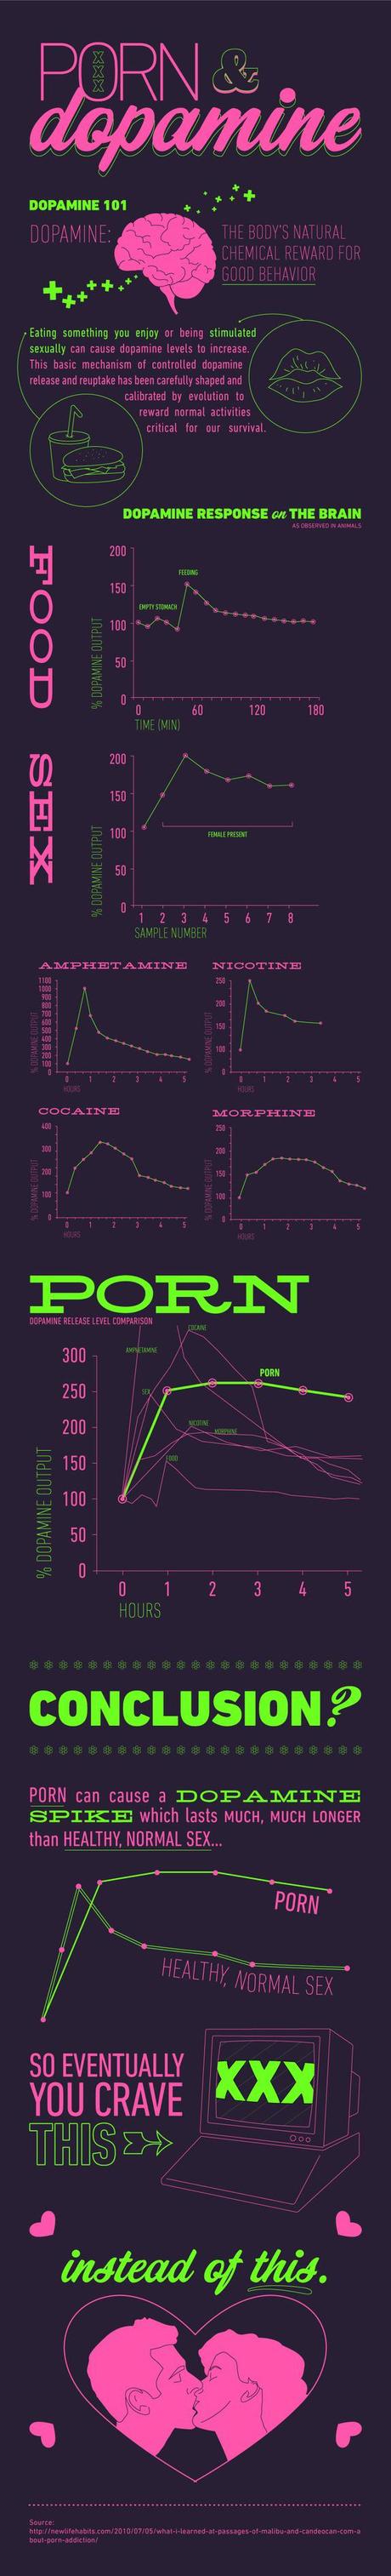 Porn Viewing Effects on Dopamine Levels